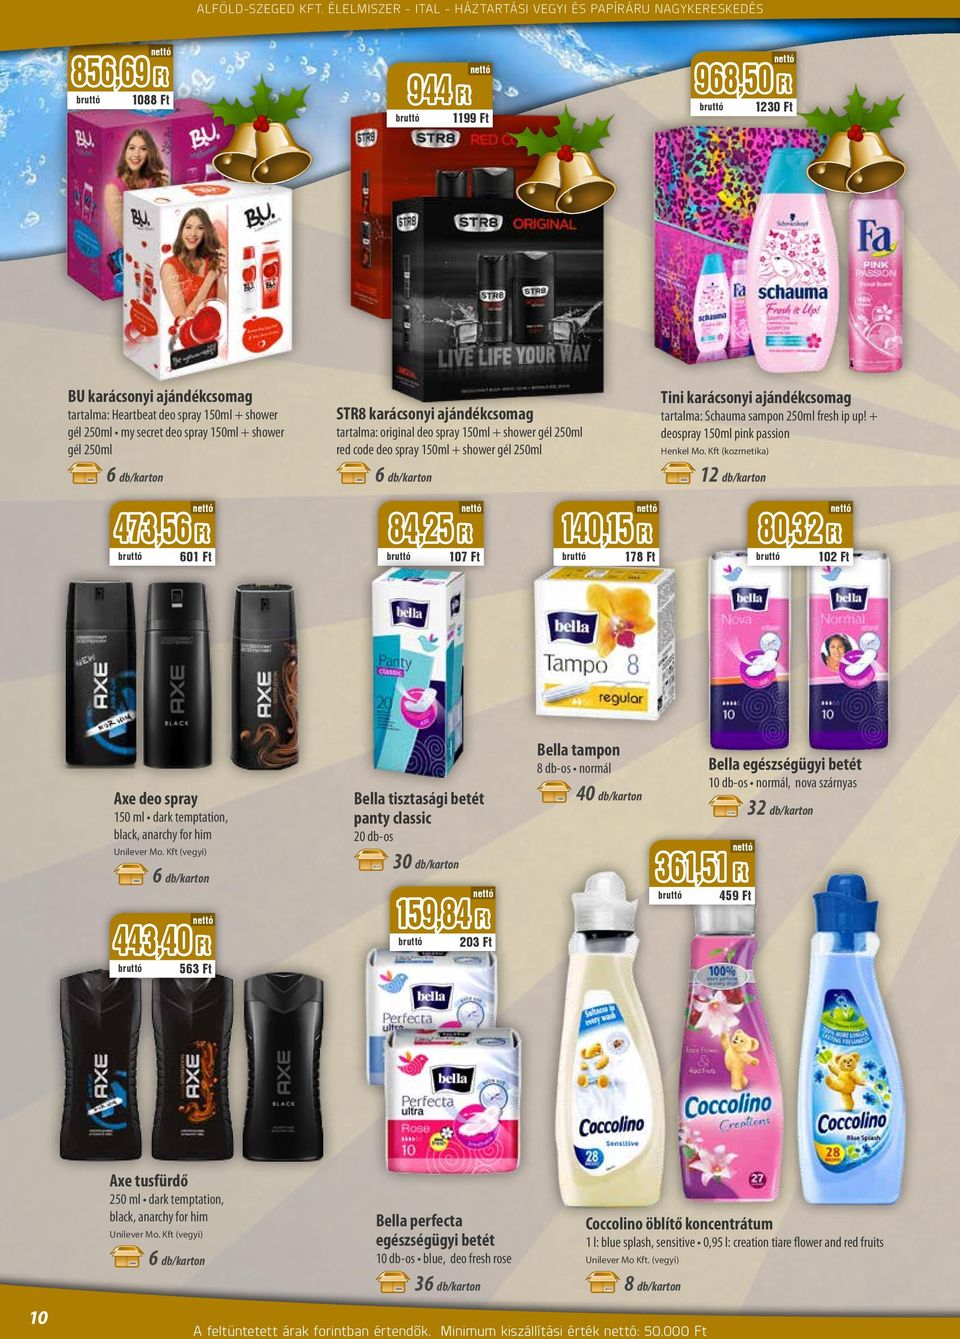 + deospray 150ml pink passion Henkel Mo. Kft (kozmetika) 473,56 Ft 601 Ft 84,25 Ft 107 Ft 140,15 Ft 178 Ft 80,32 Ft 102 Ft Axe deo spray 150 ml dark temptation, black, anarchy for him Unilever Mo.